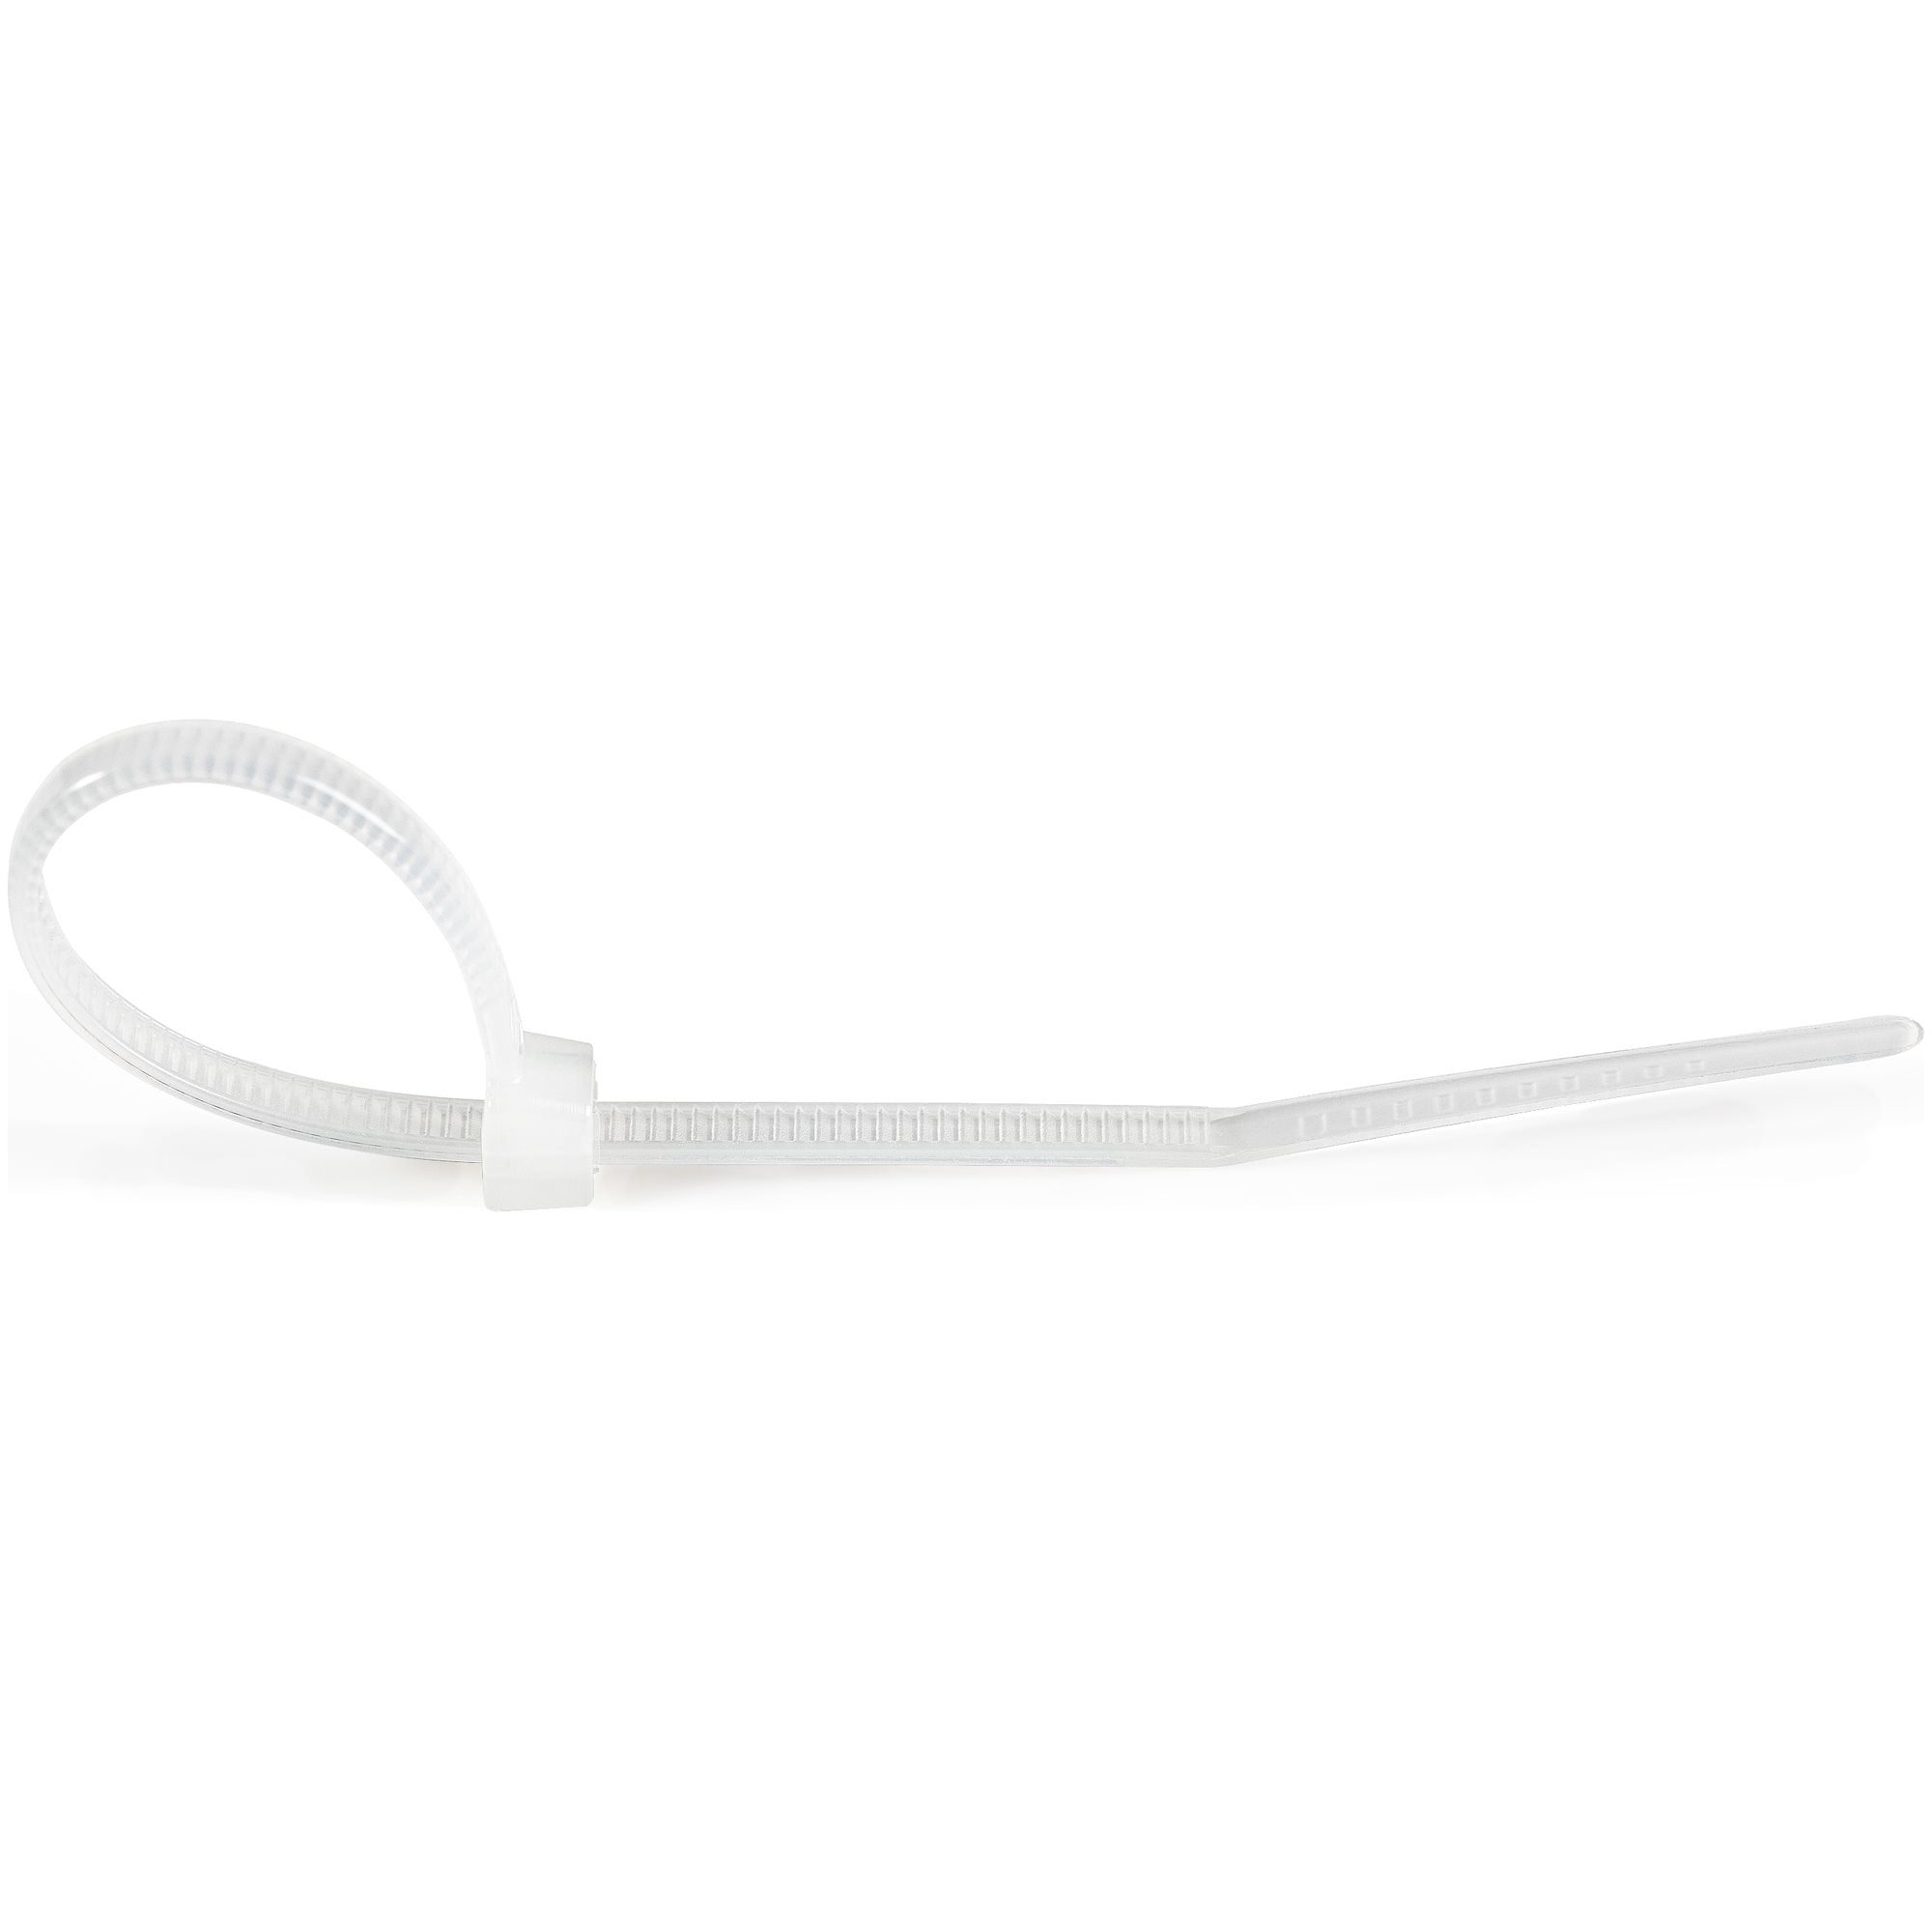 StarTech.com 4"(10cm) Cable Ties - 1/16"(2mm) wide, 7/8"(22mm) Bundle Diameter, 18lb(8kg) Tensile Strength, Nylon Self Locking Zip Ties with Curved Tip - 94V-2/UL Listed, 100 Pack - White